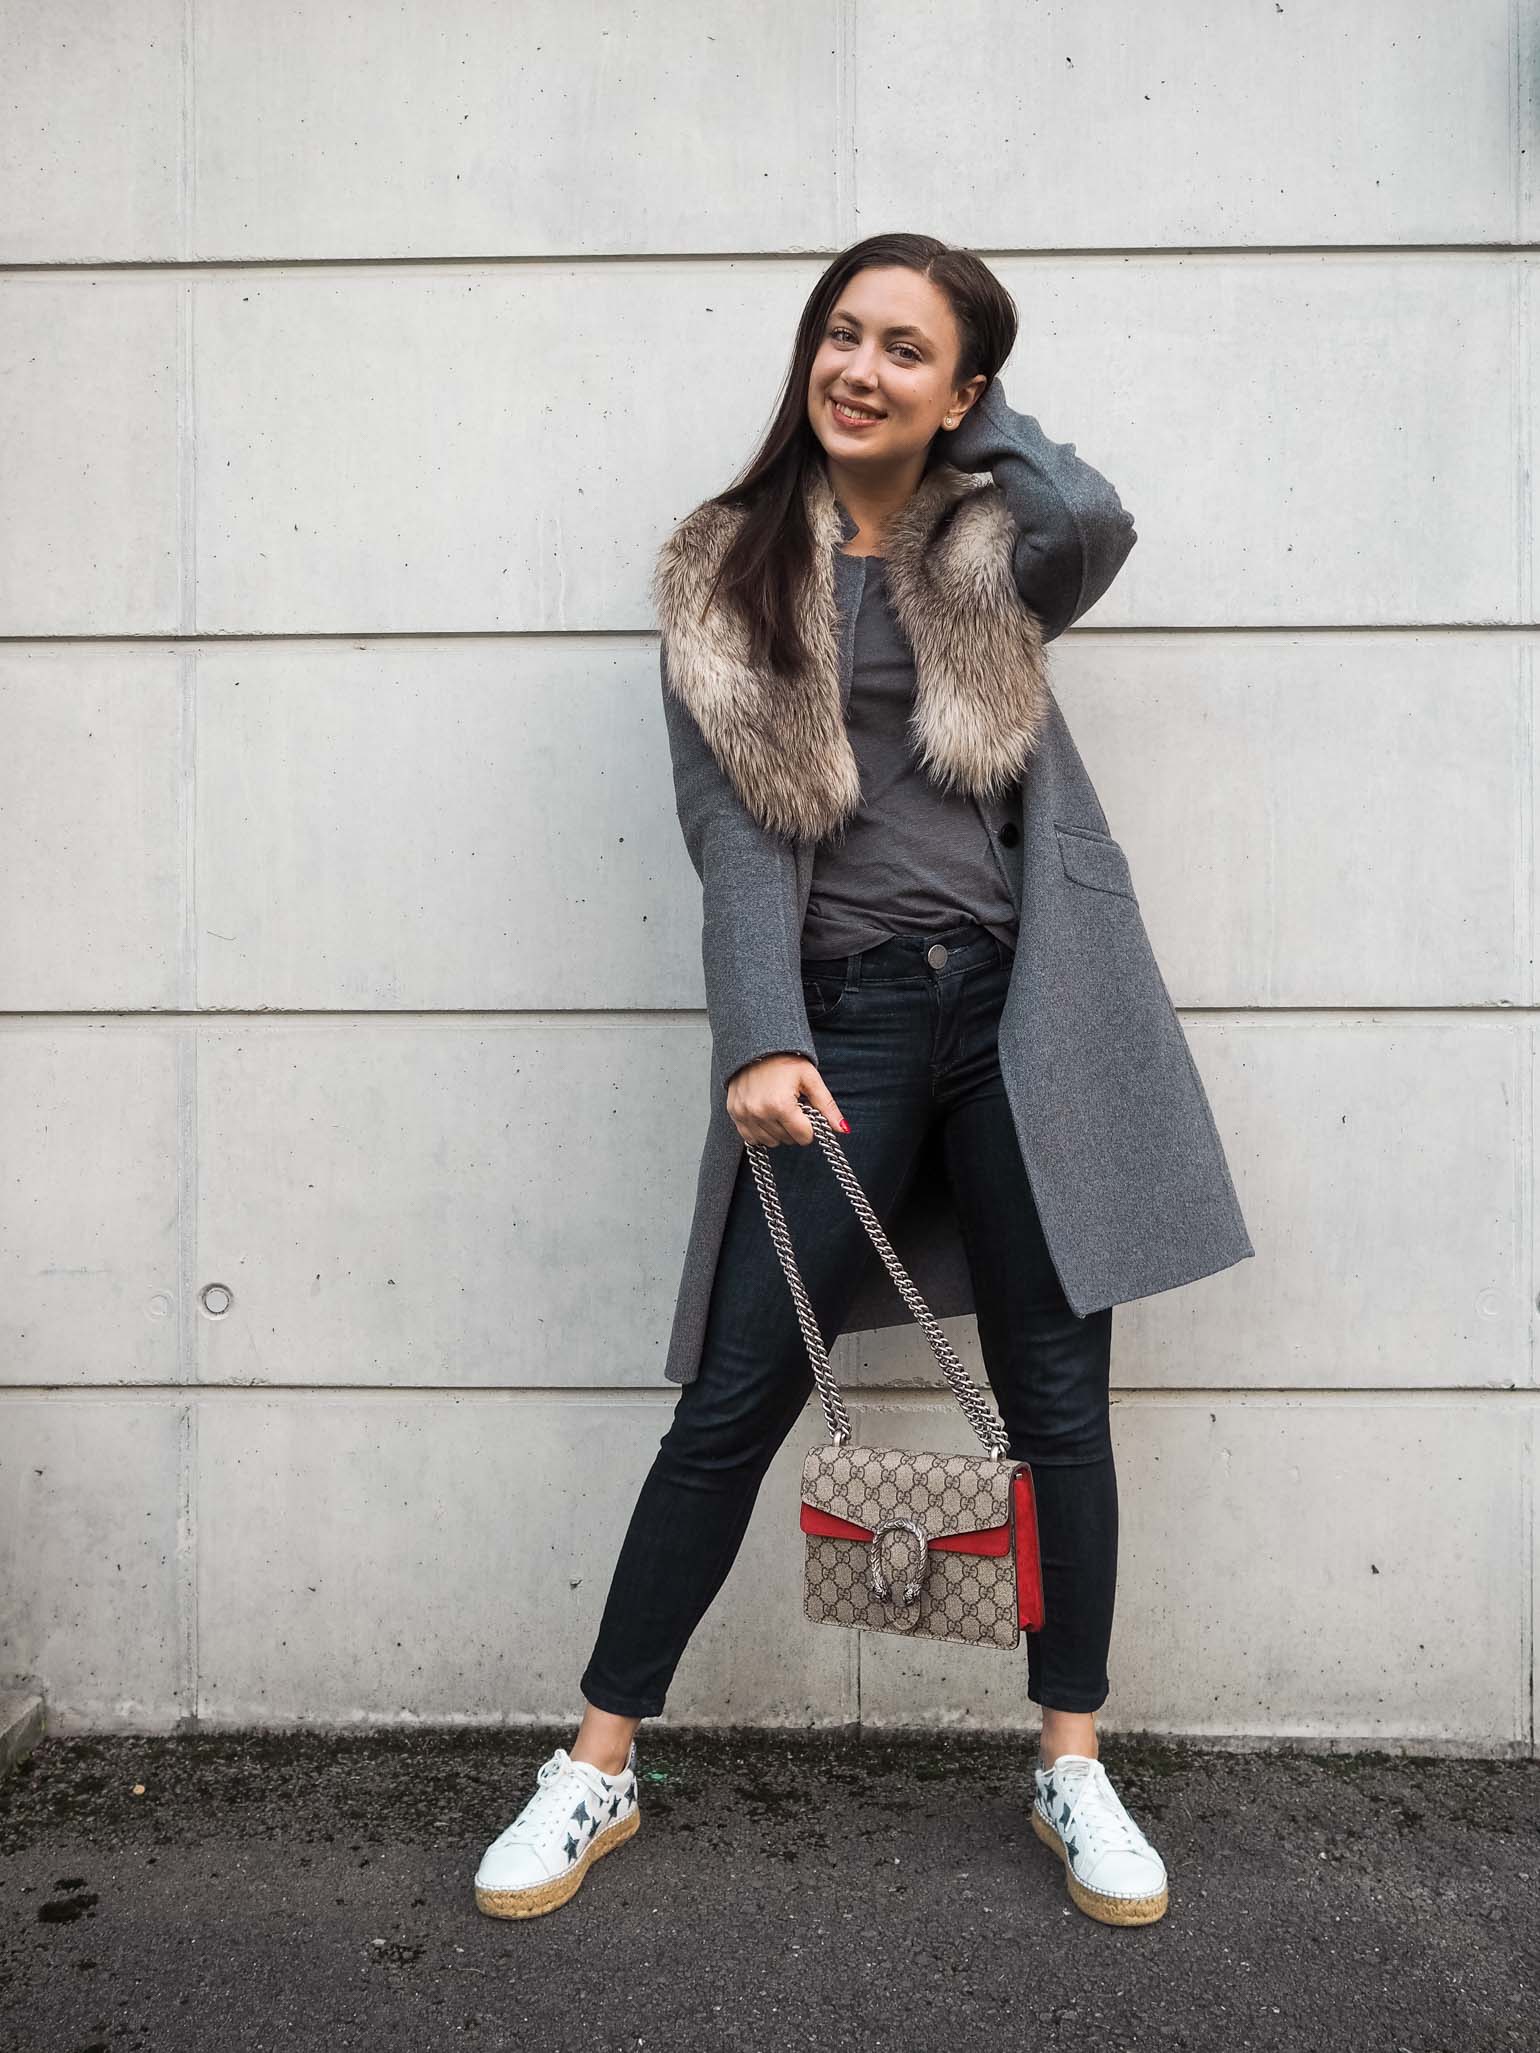 How to Keep Your Weekend Style Casual and Wear Faux Fur - The Brunette ...